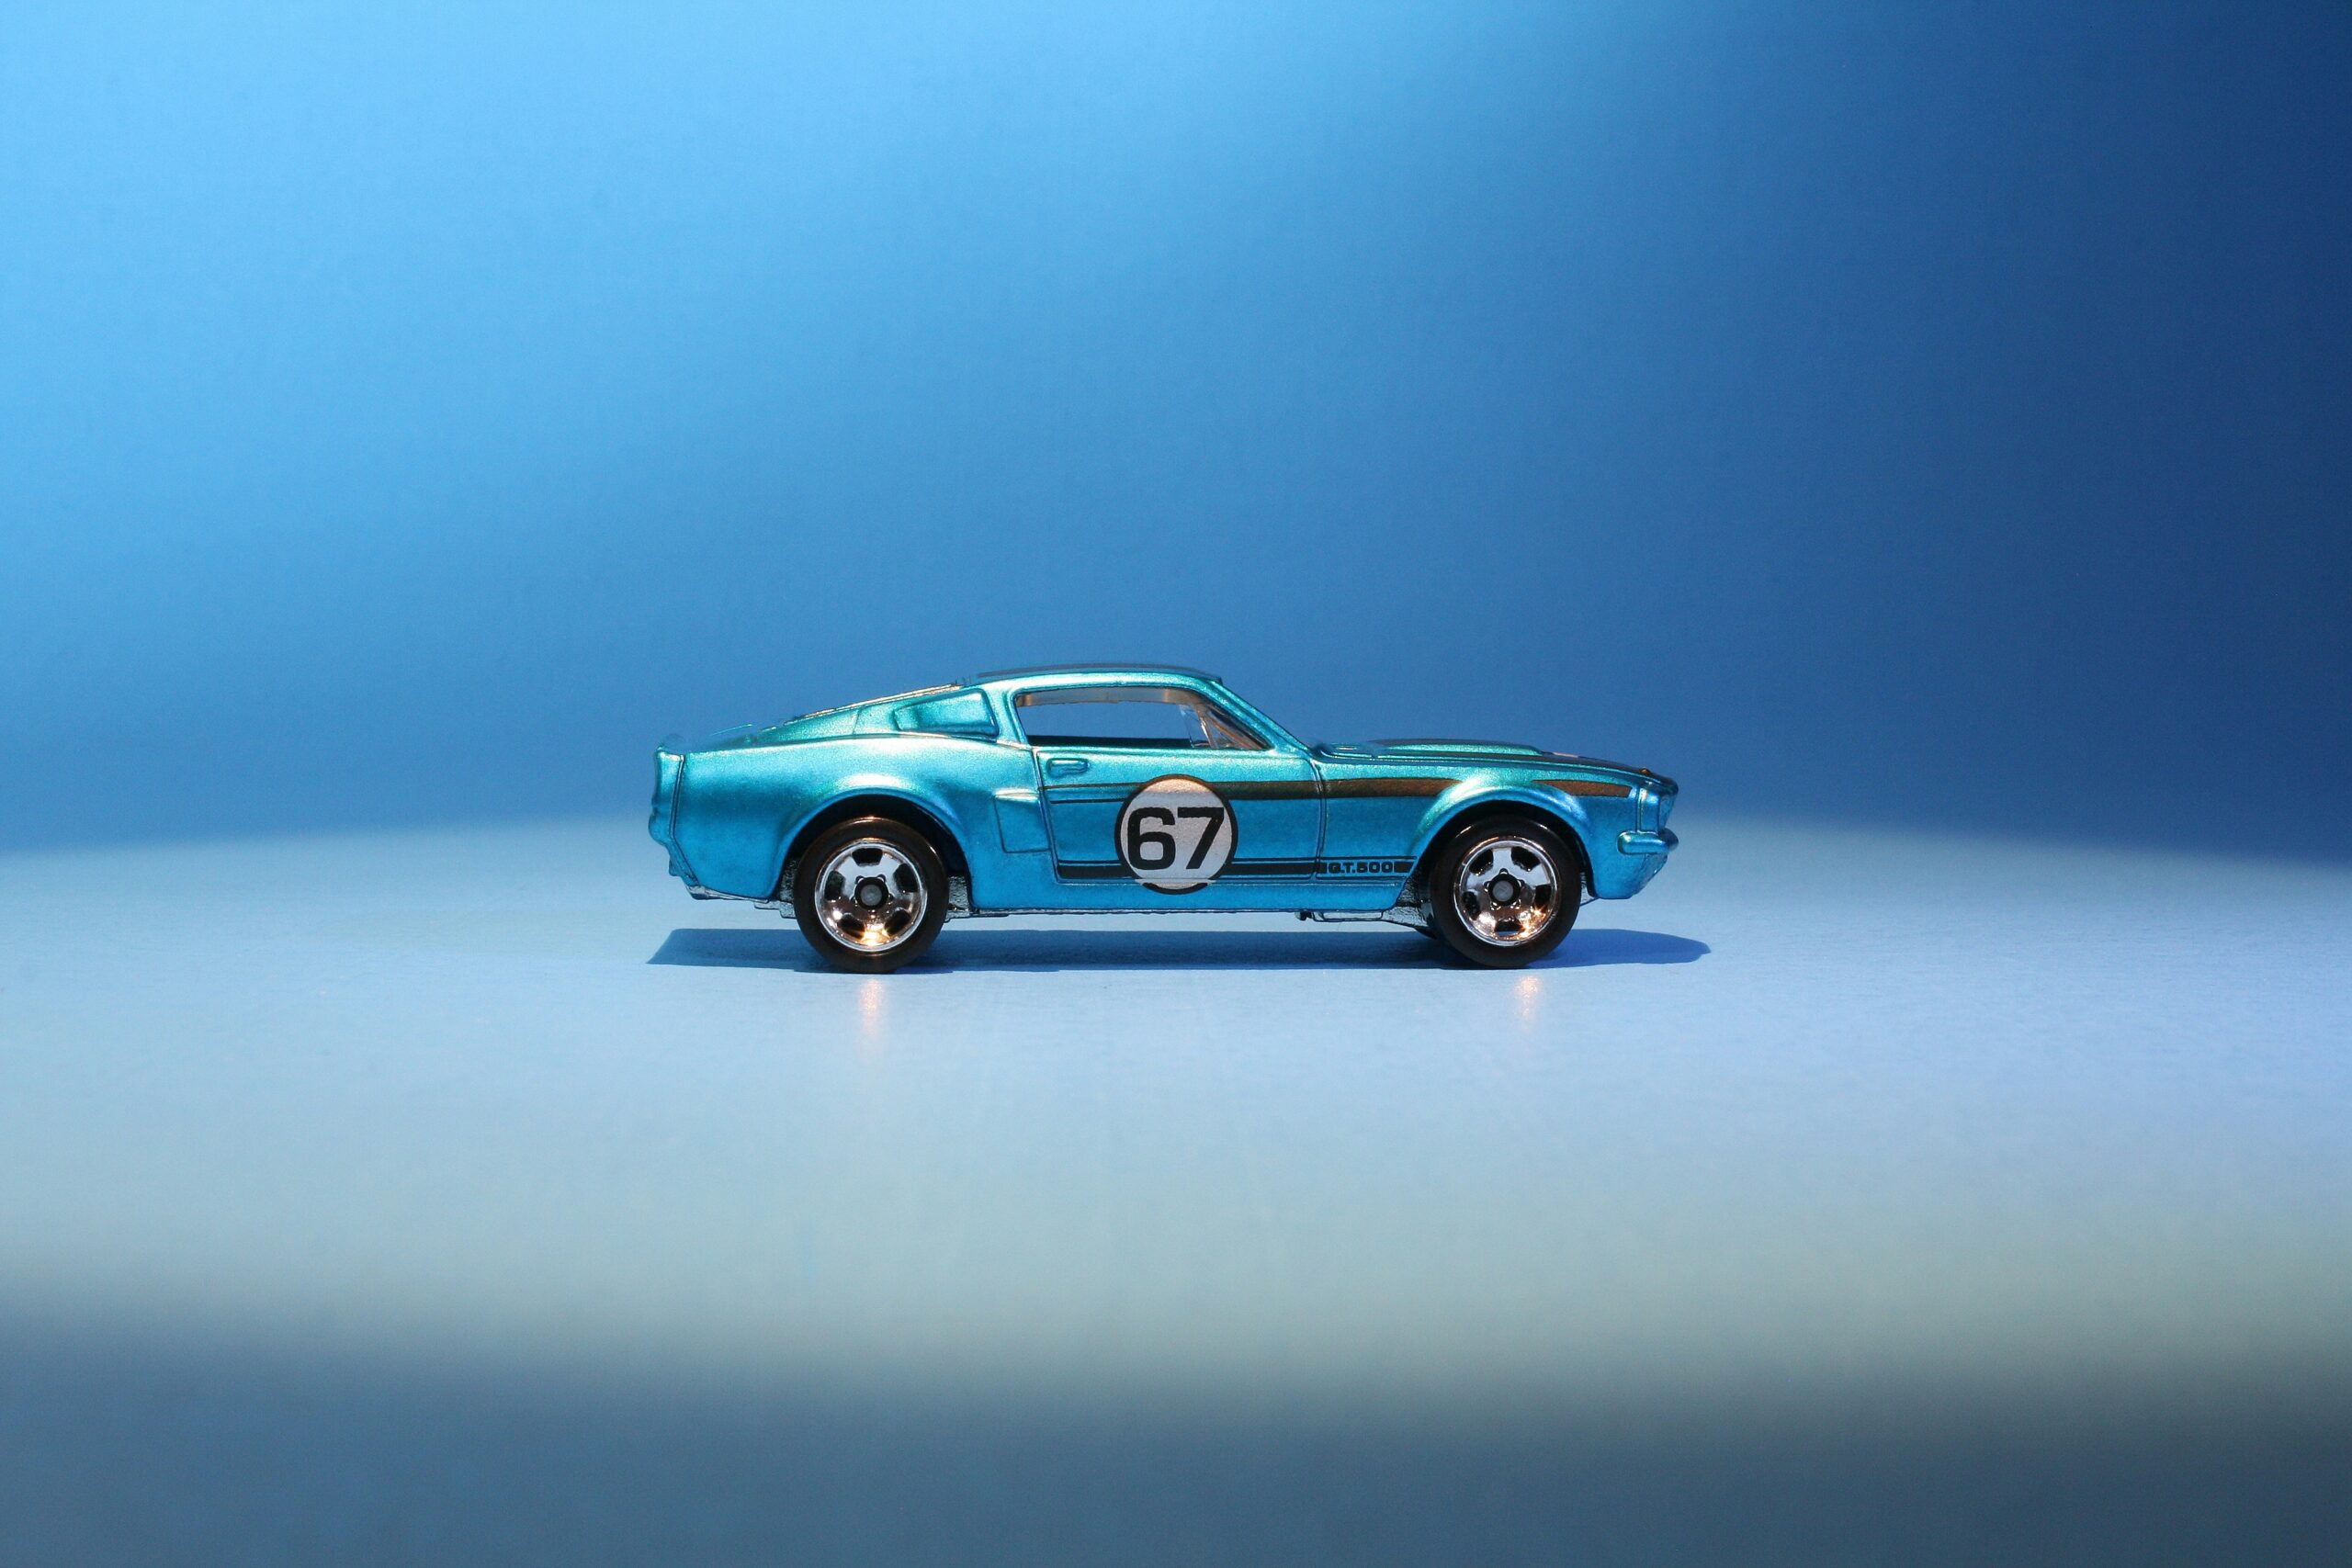 Hot Wheels vs Tomica: A Comparison of Toy Car Brands